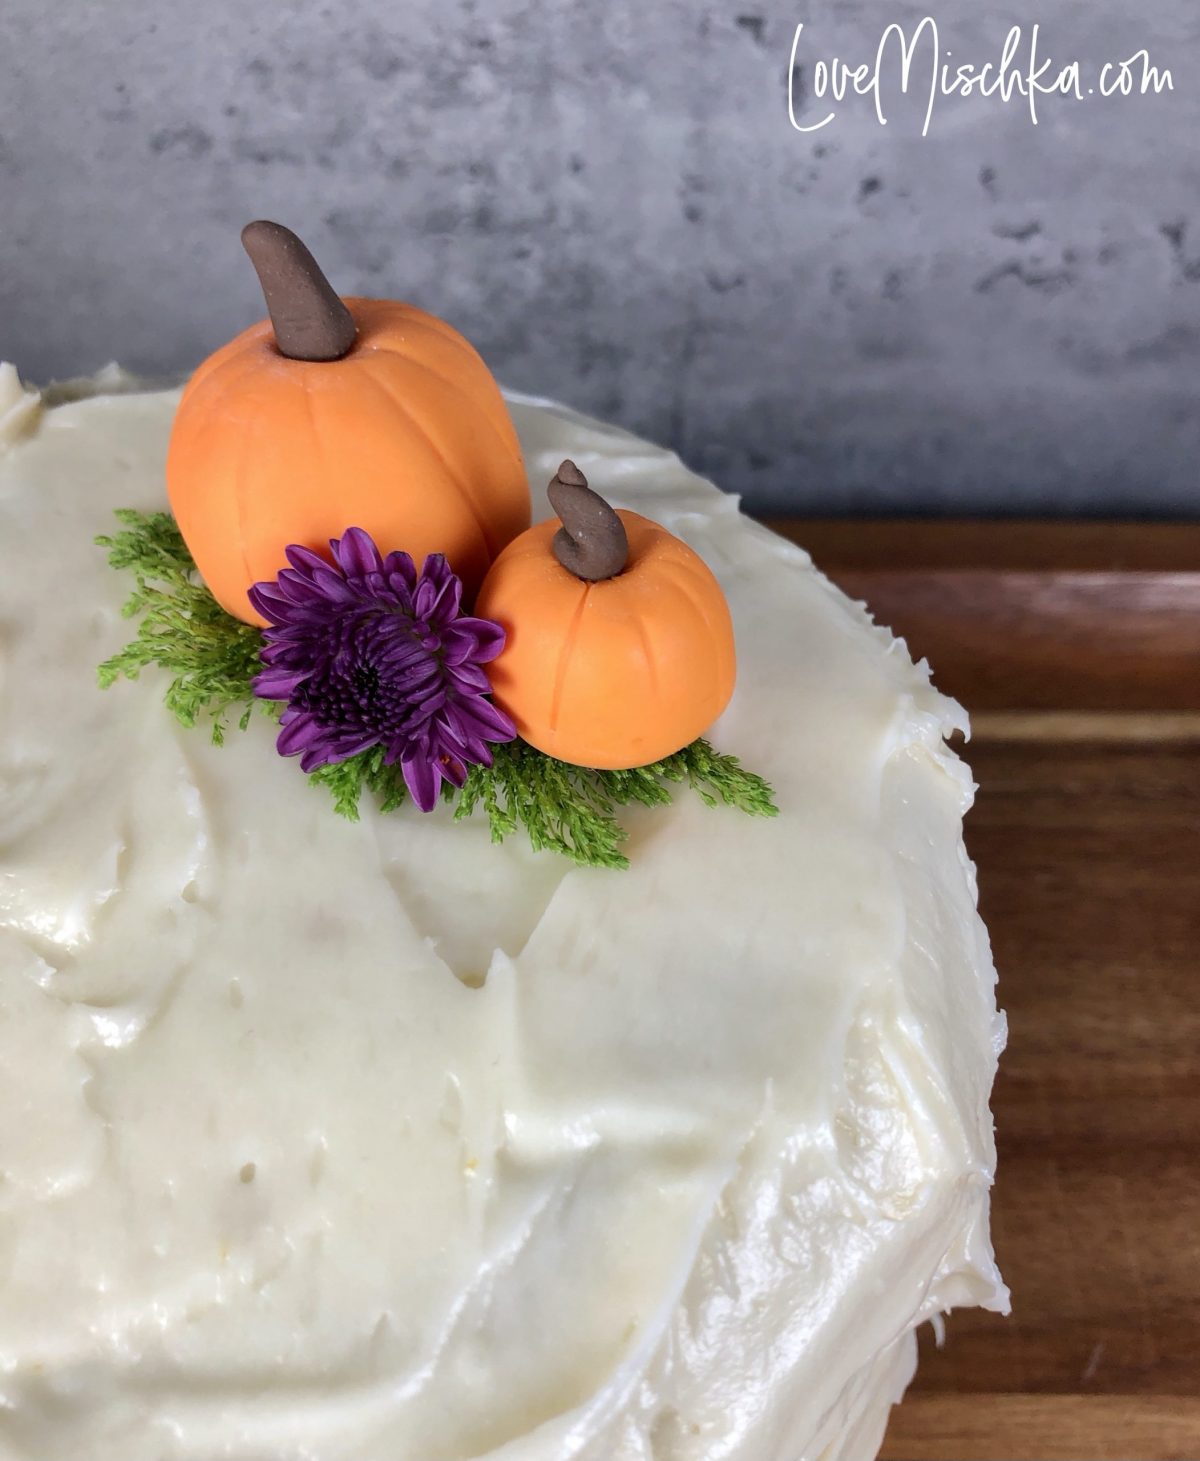 Round cake with fluffy cream cheese frosting, two cute pumpkins, and a purple flower on a wooden platter.